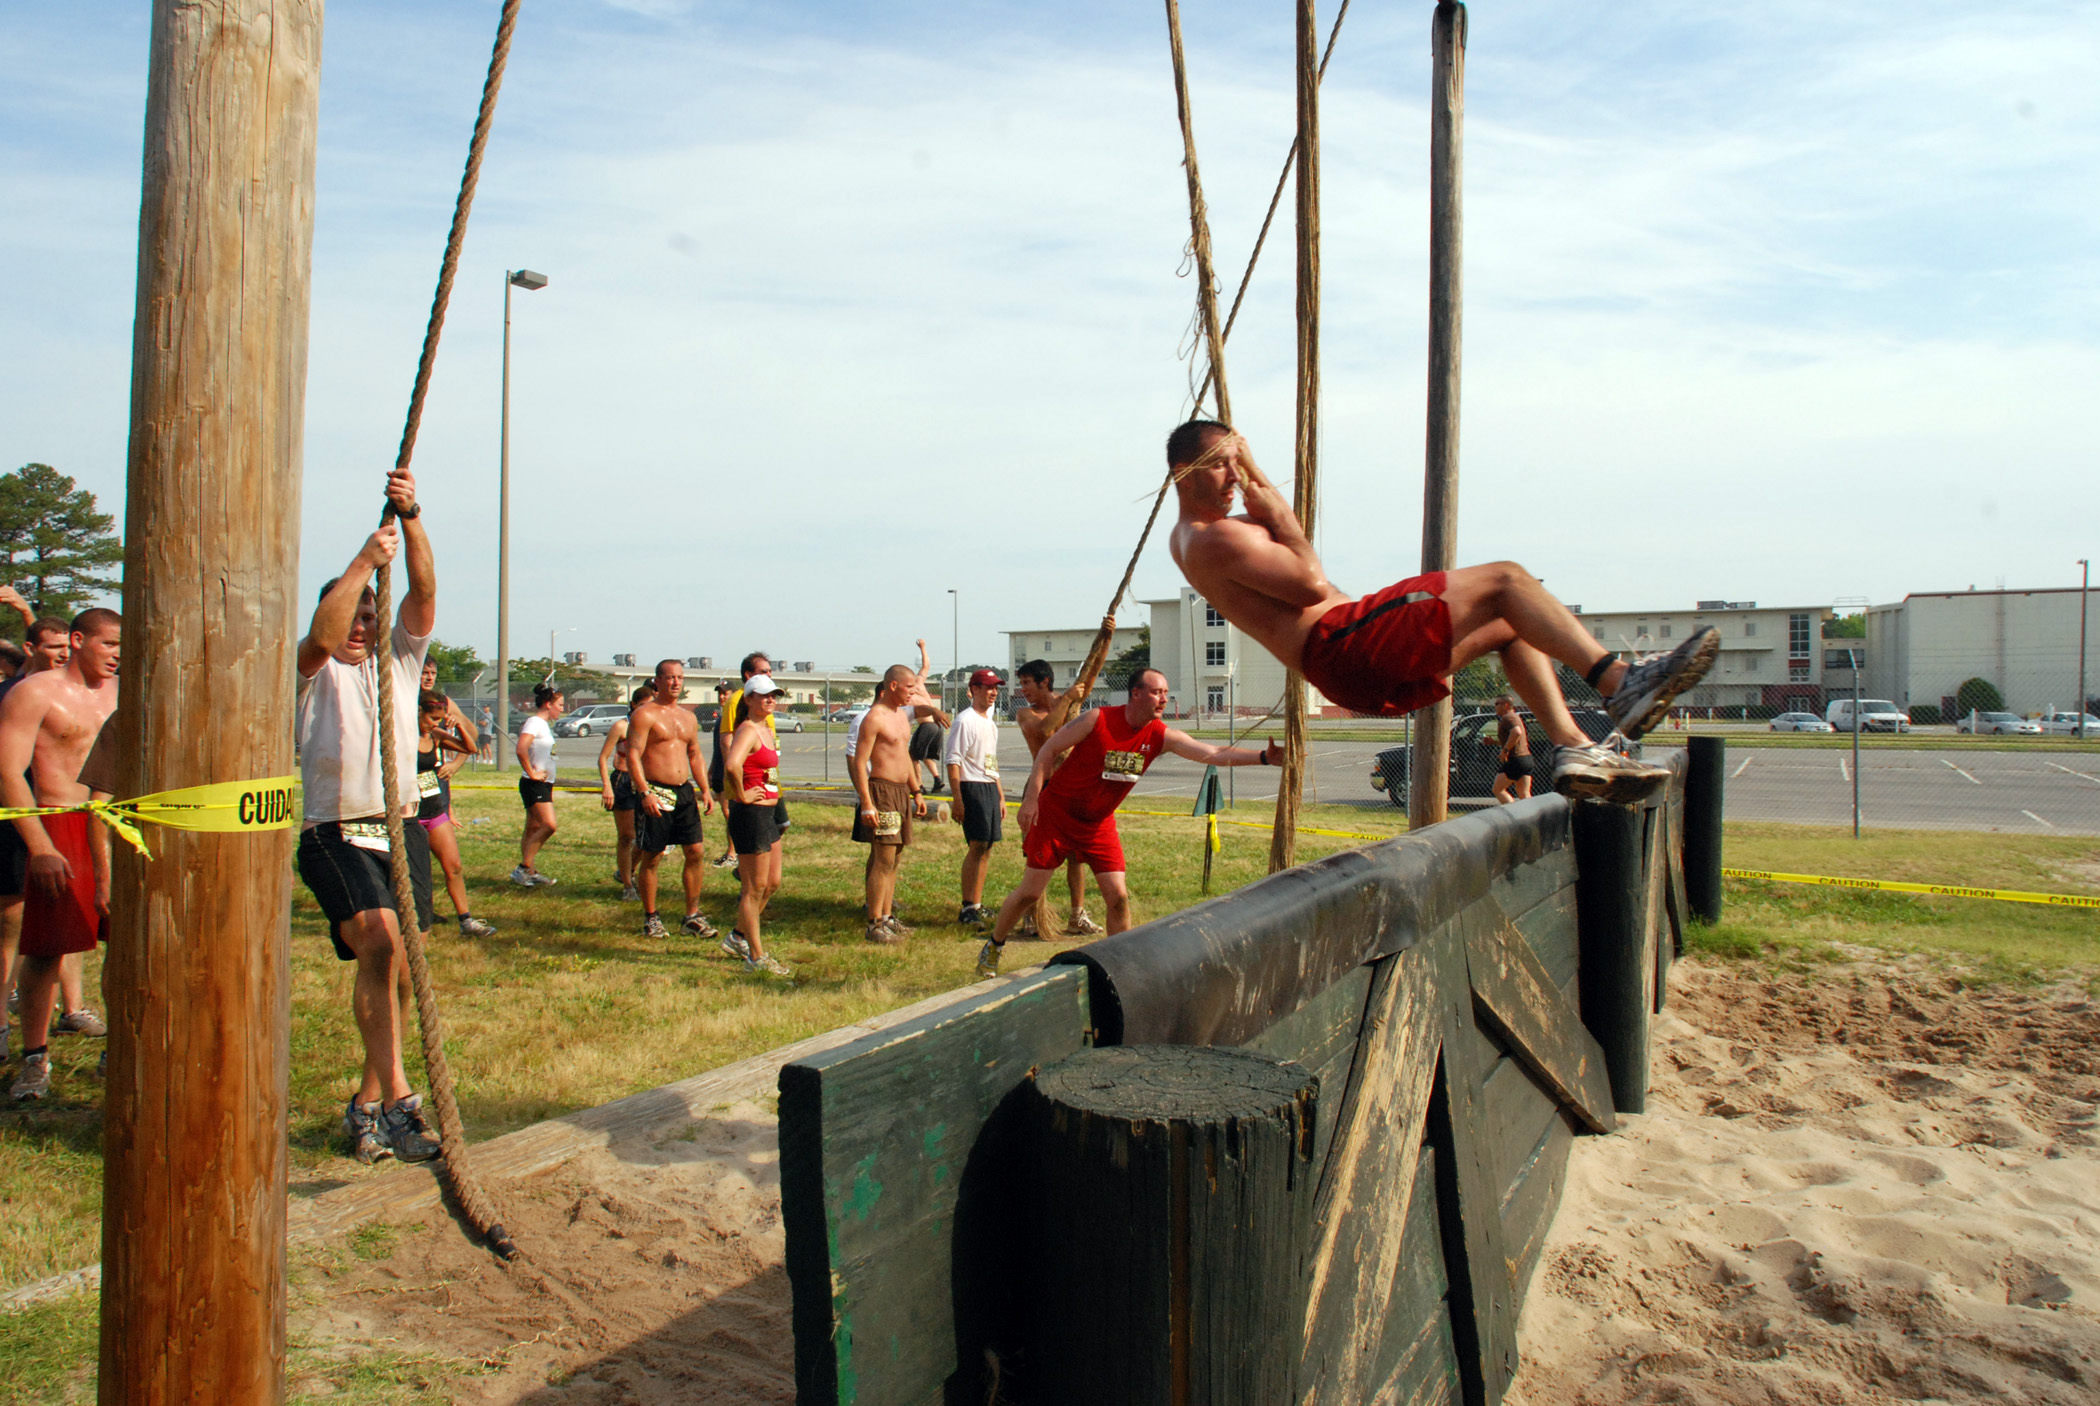 obstacle course racing, ocr, fun workouts, cardio, races Fitness